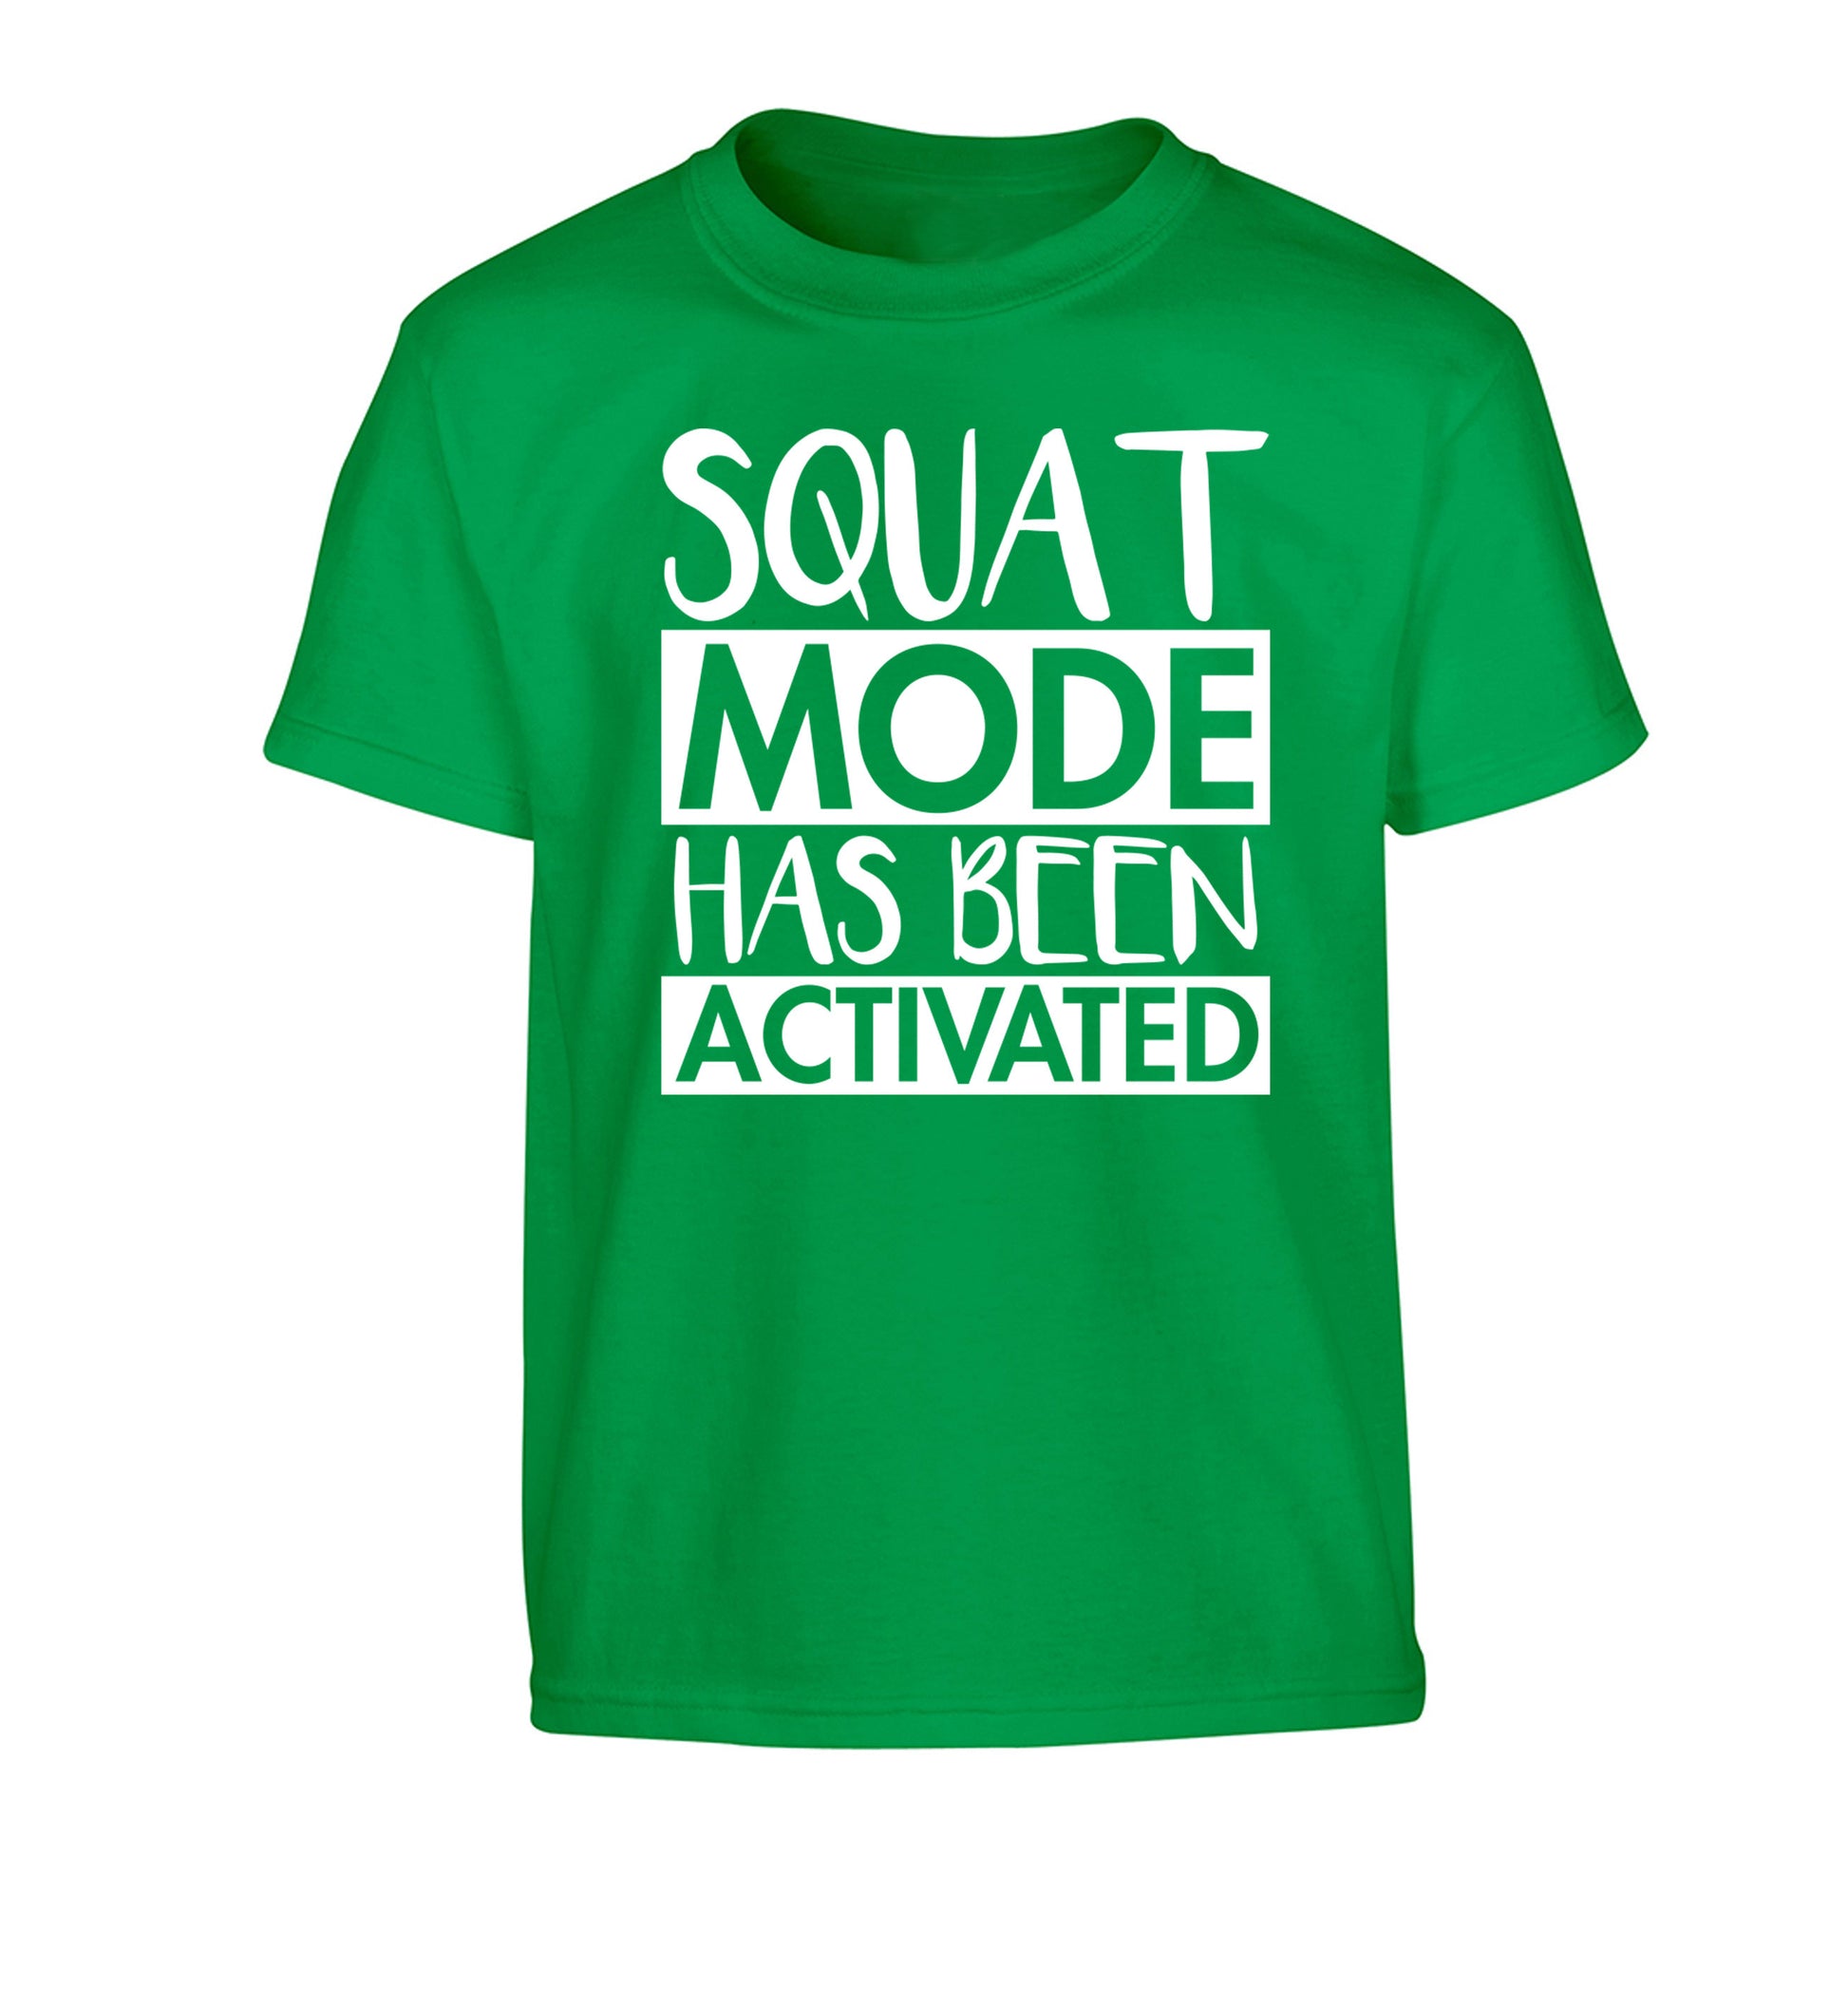 Squat mode activated Children's green Tshirt 12-14 Years